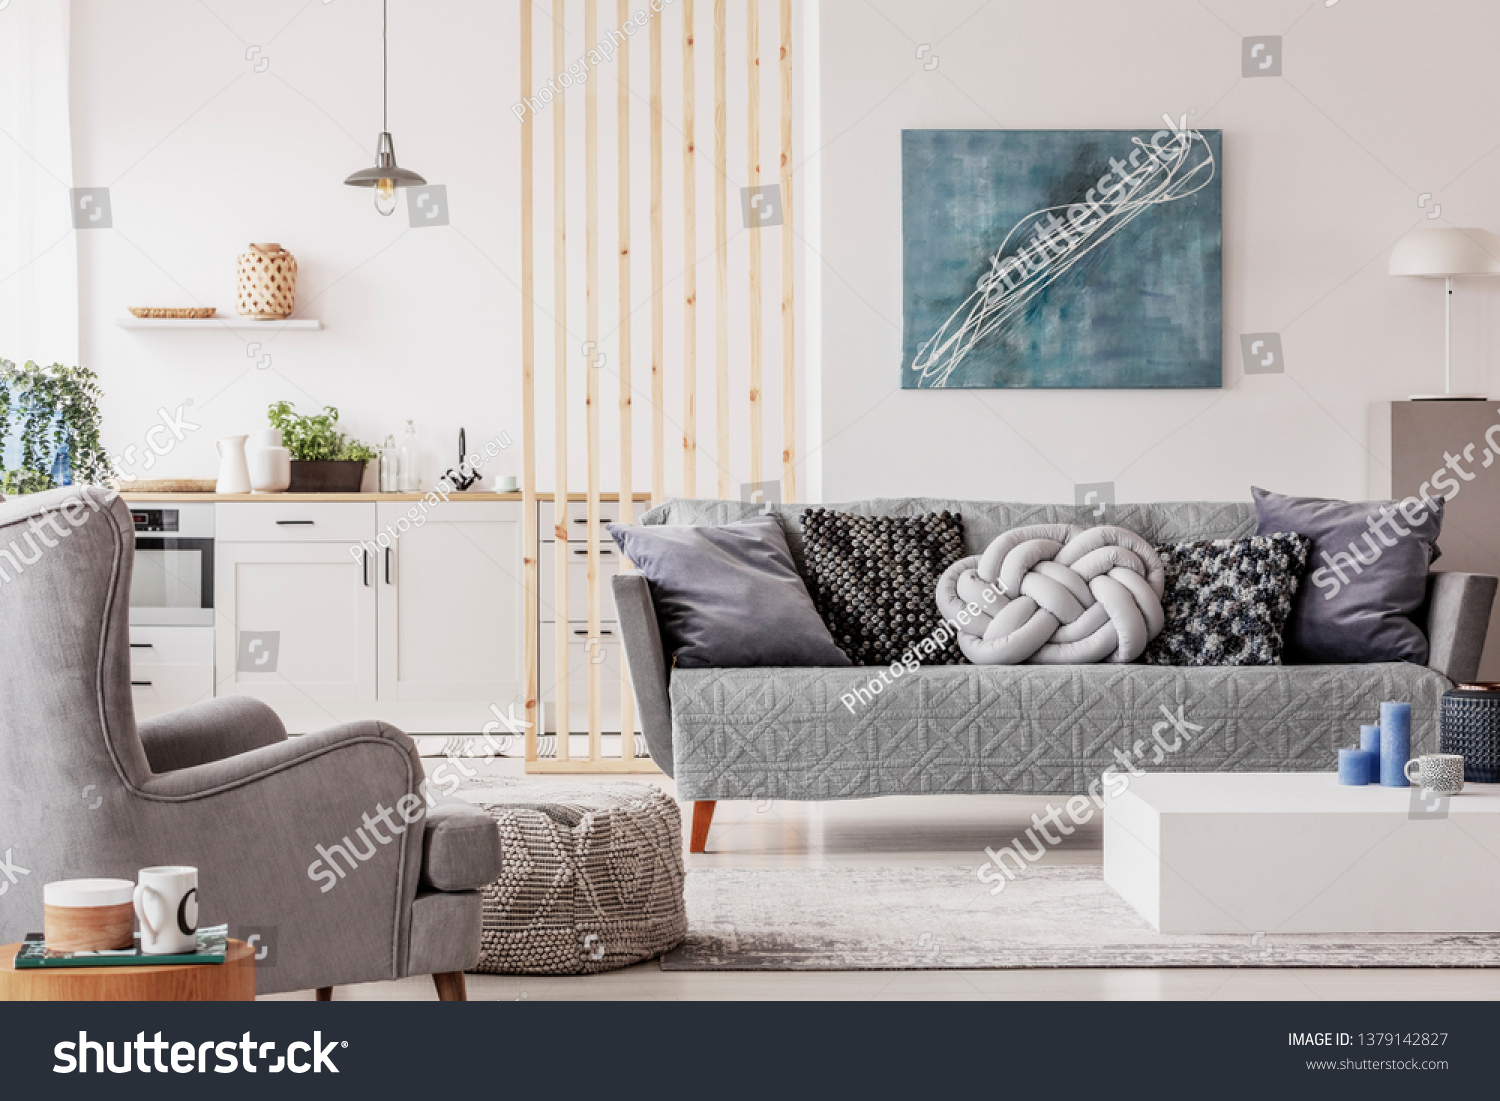 Open plan studio apartment with small white kitchen and living room with grey couch and wooden coffee table #1379142827